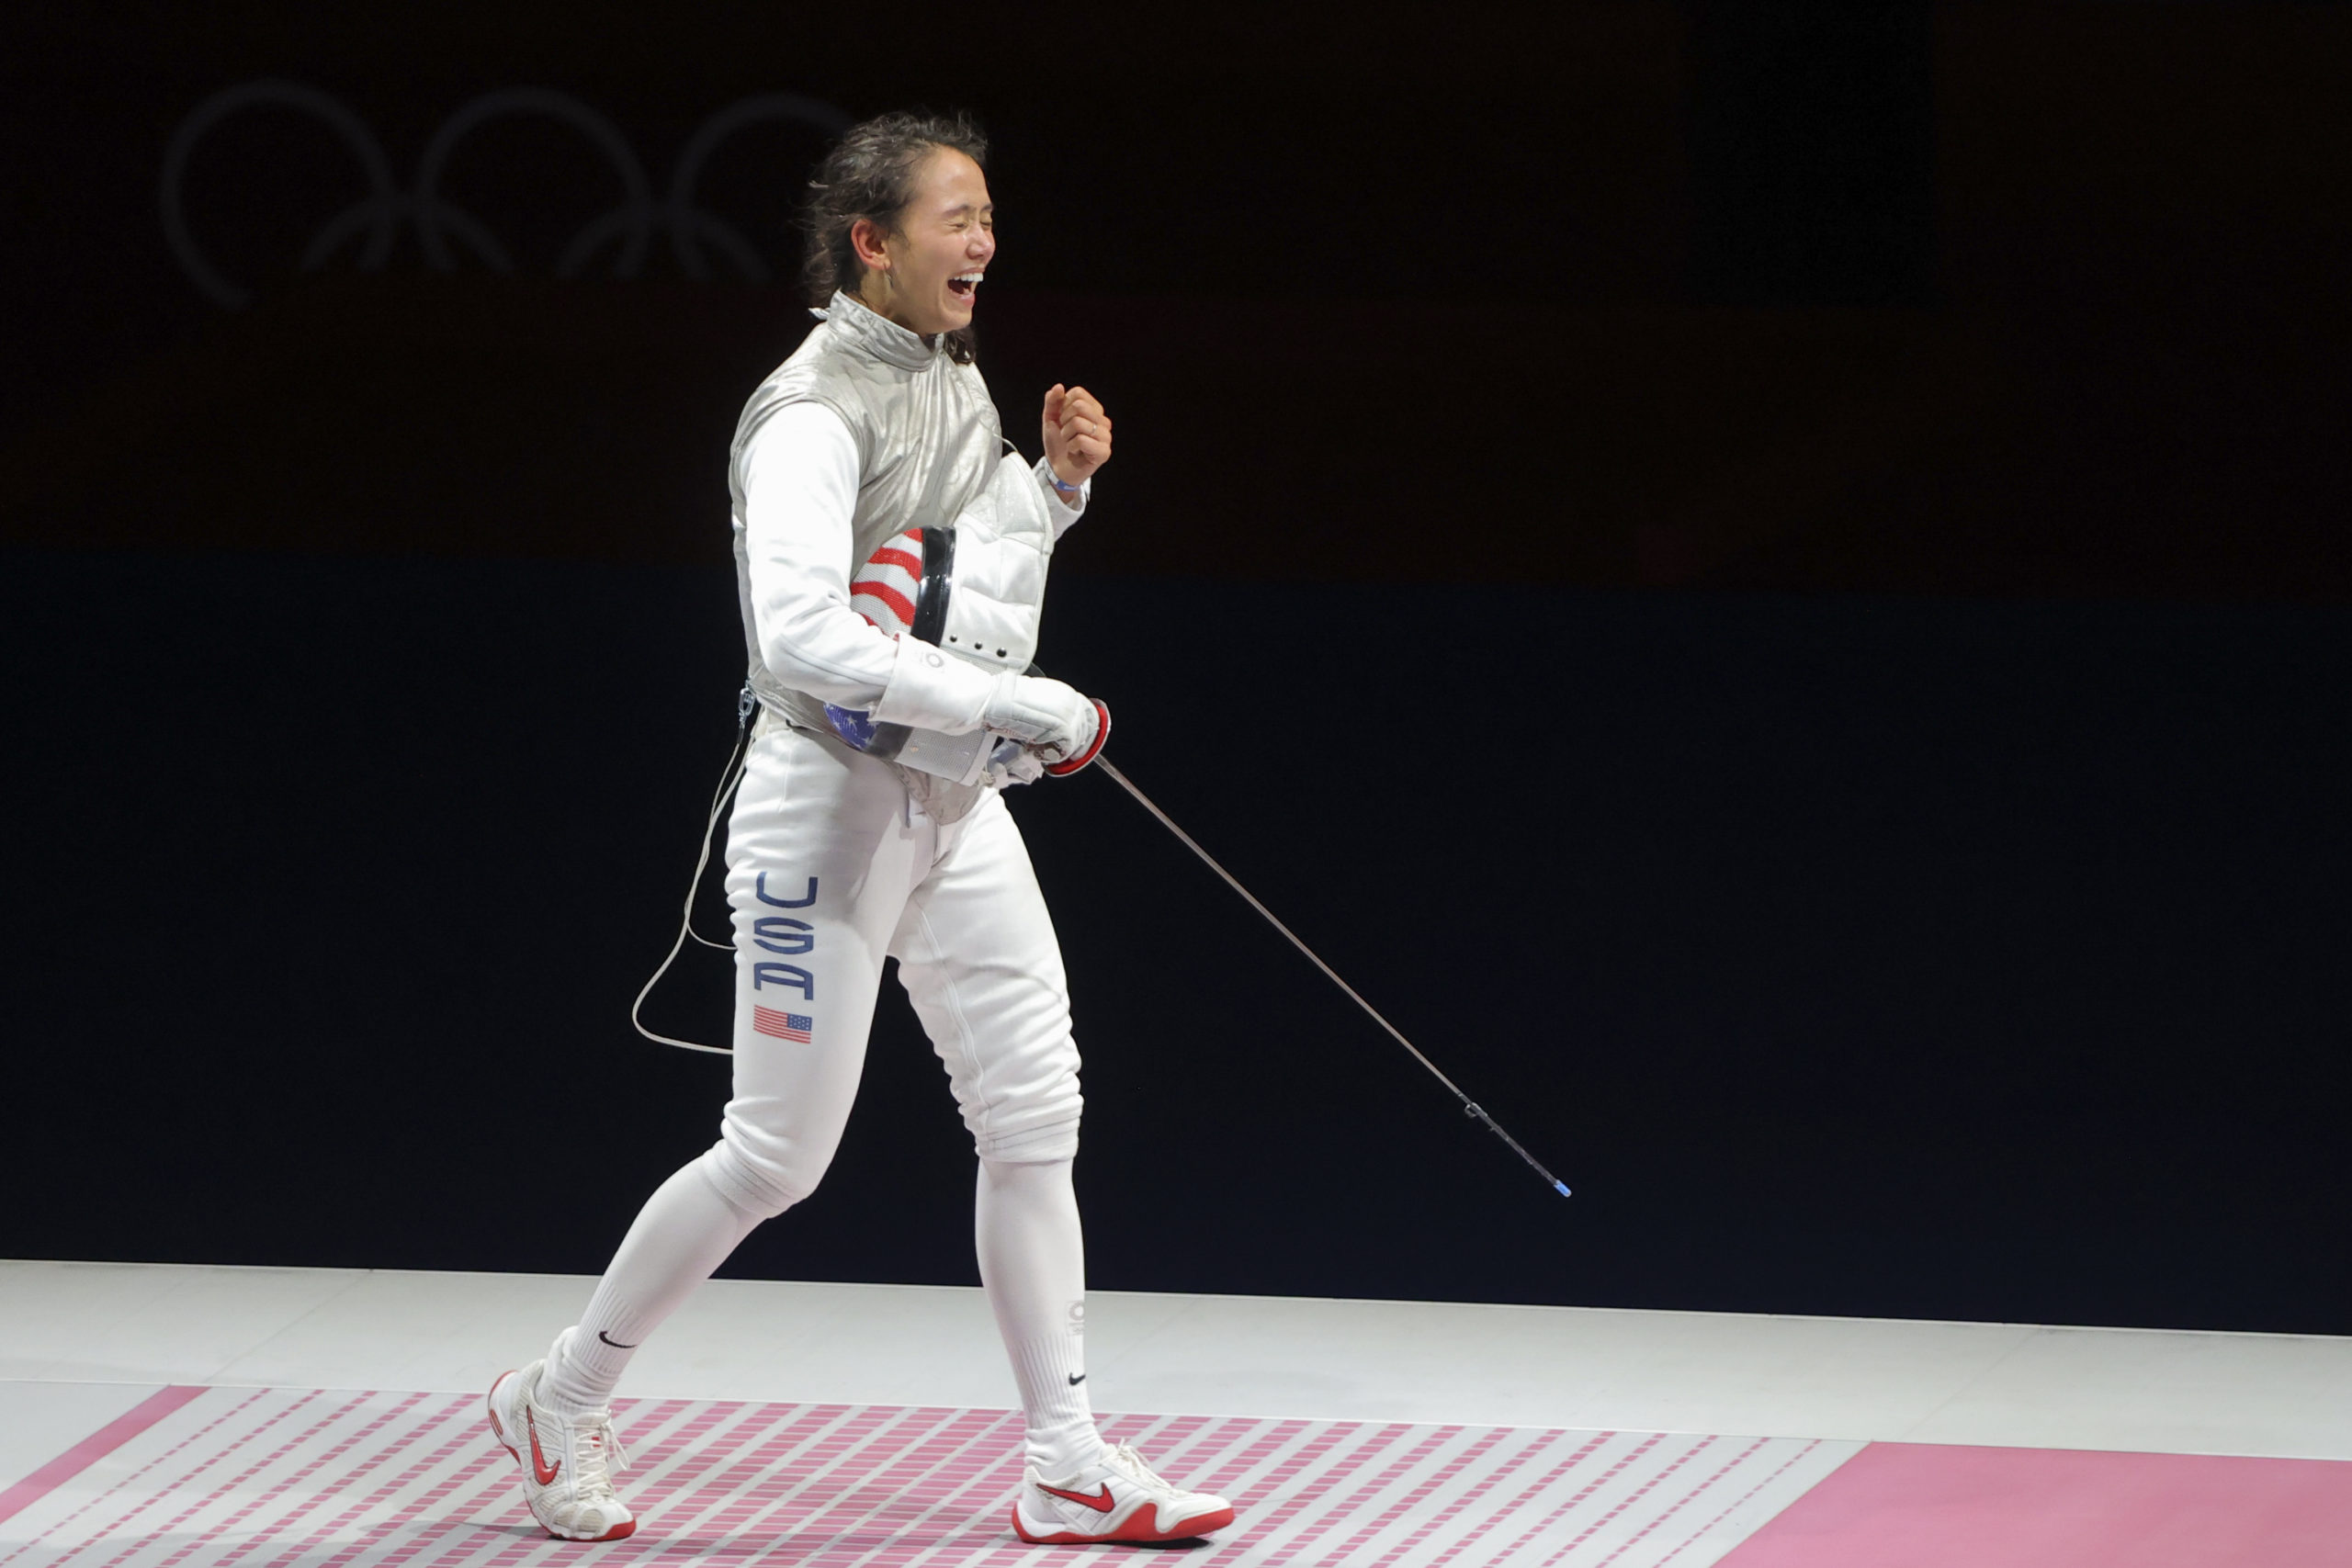 Olympics - Fencing - Women's Individual Foil - Gold medal match - Makuhari Messe Hall B - Chiba, Japan - July 25, 2021. Lee Kiefer of the United States celebrates after winning gold 